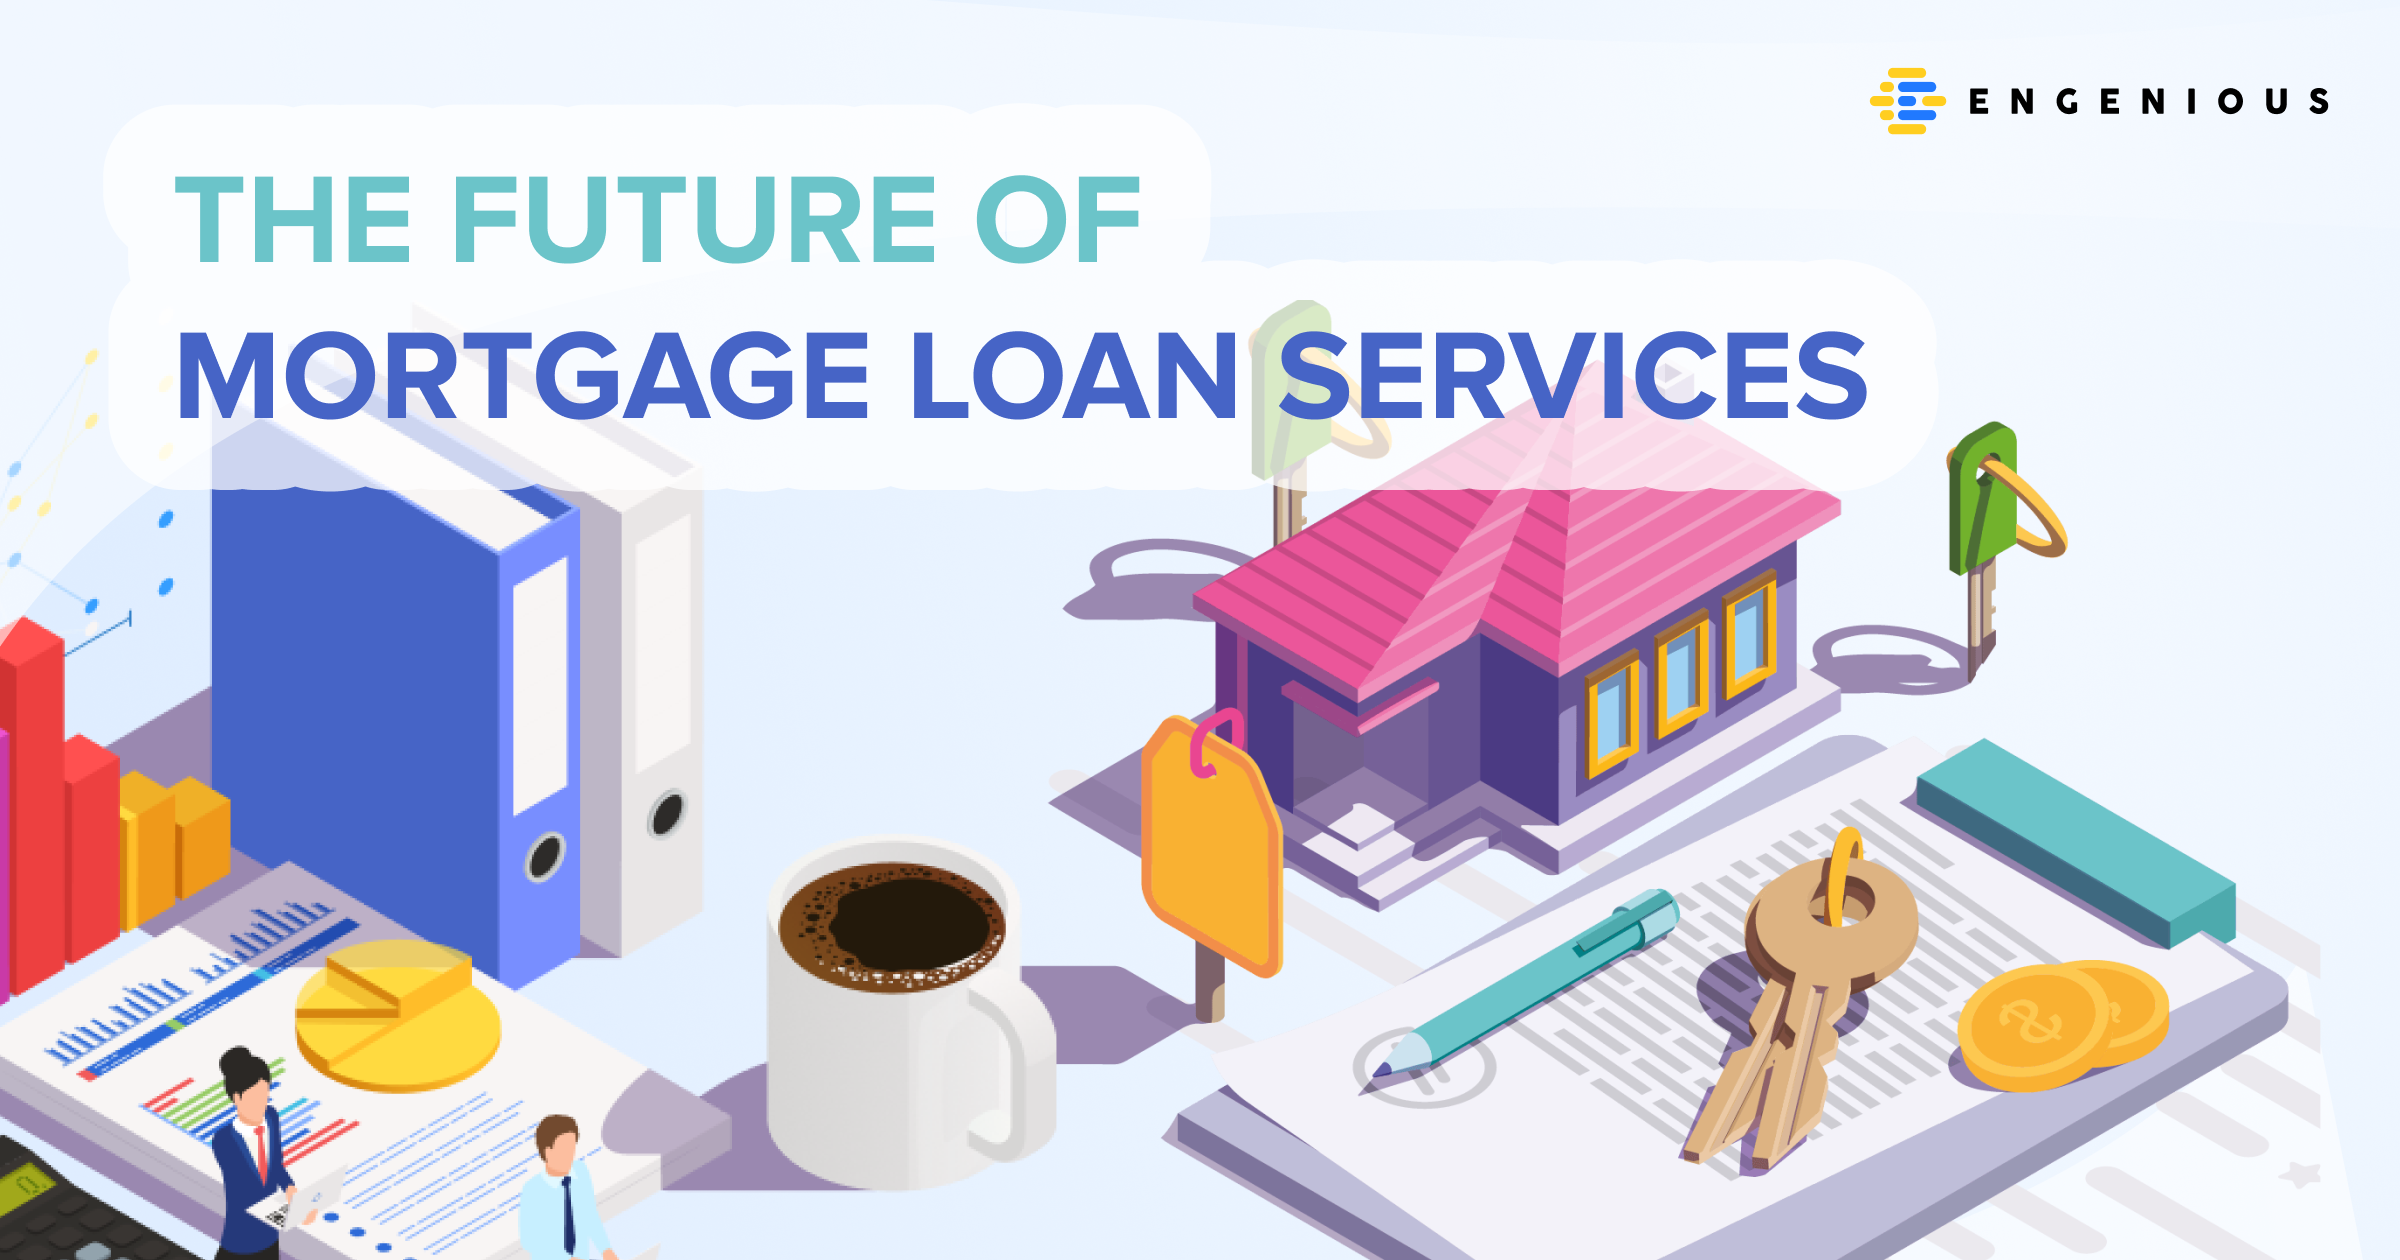 The future of digital mortgage loan services